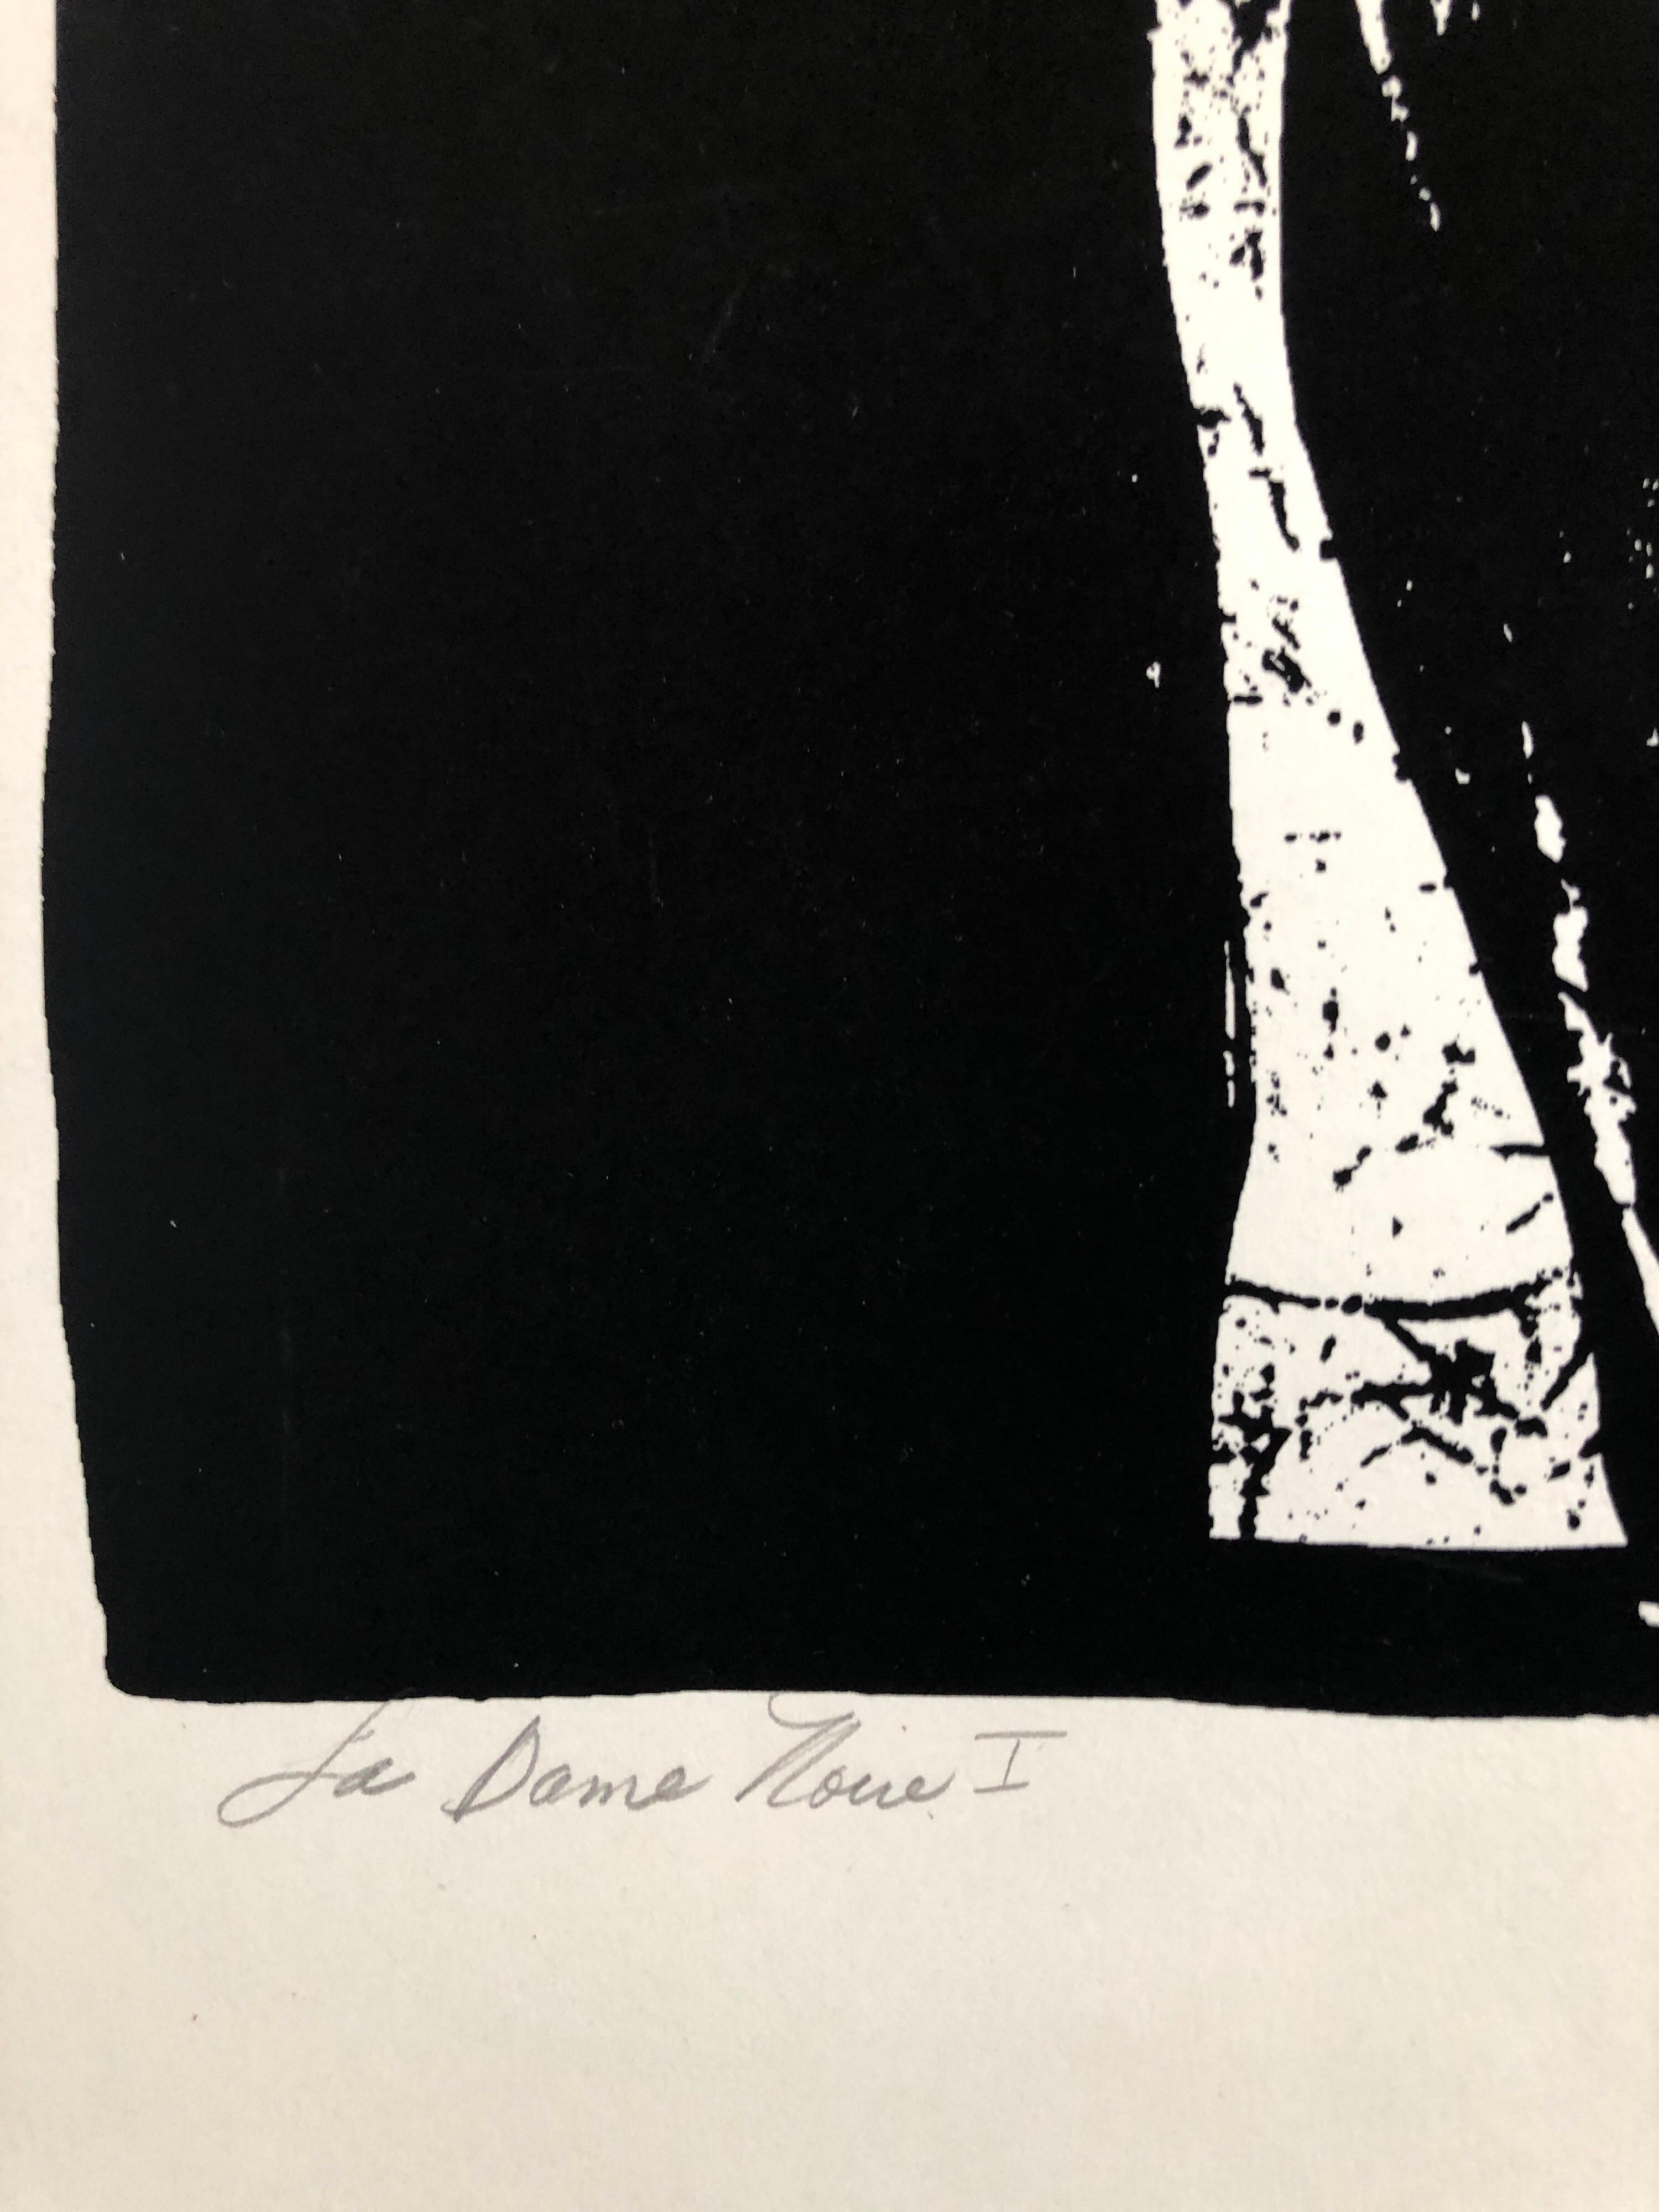 La Dame Noire#1
From the small edition of 15. from 1982. I am not sure if this is a woodcut or woodblock print or a silkscreen screenprint or some combination. 

Viola Burley Leak, American (1944 - )
Viola Leak was born in Nashville, Tennessee, she